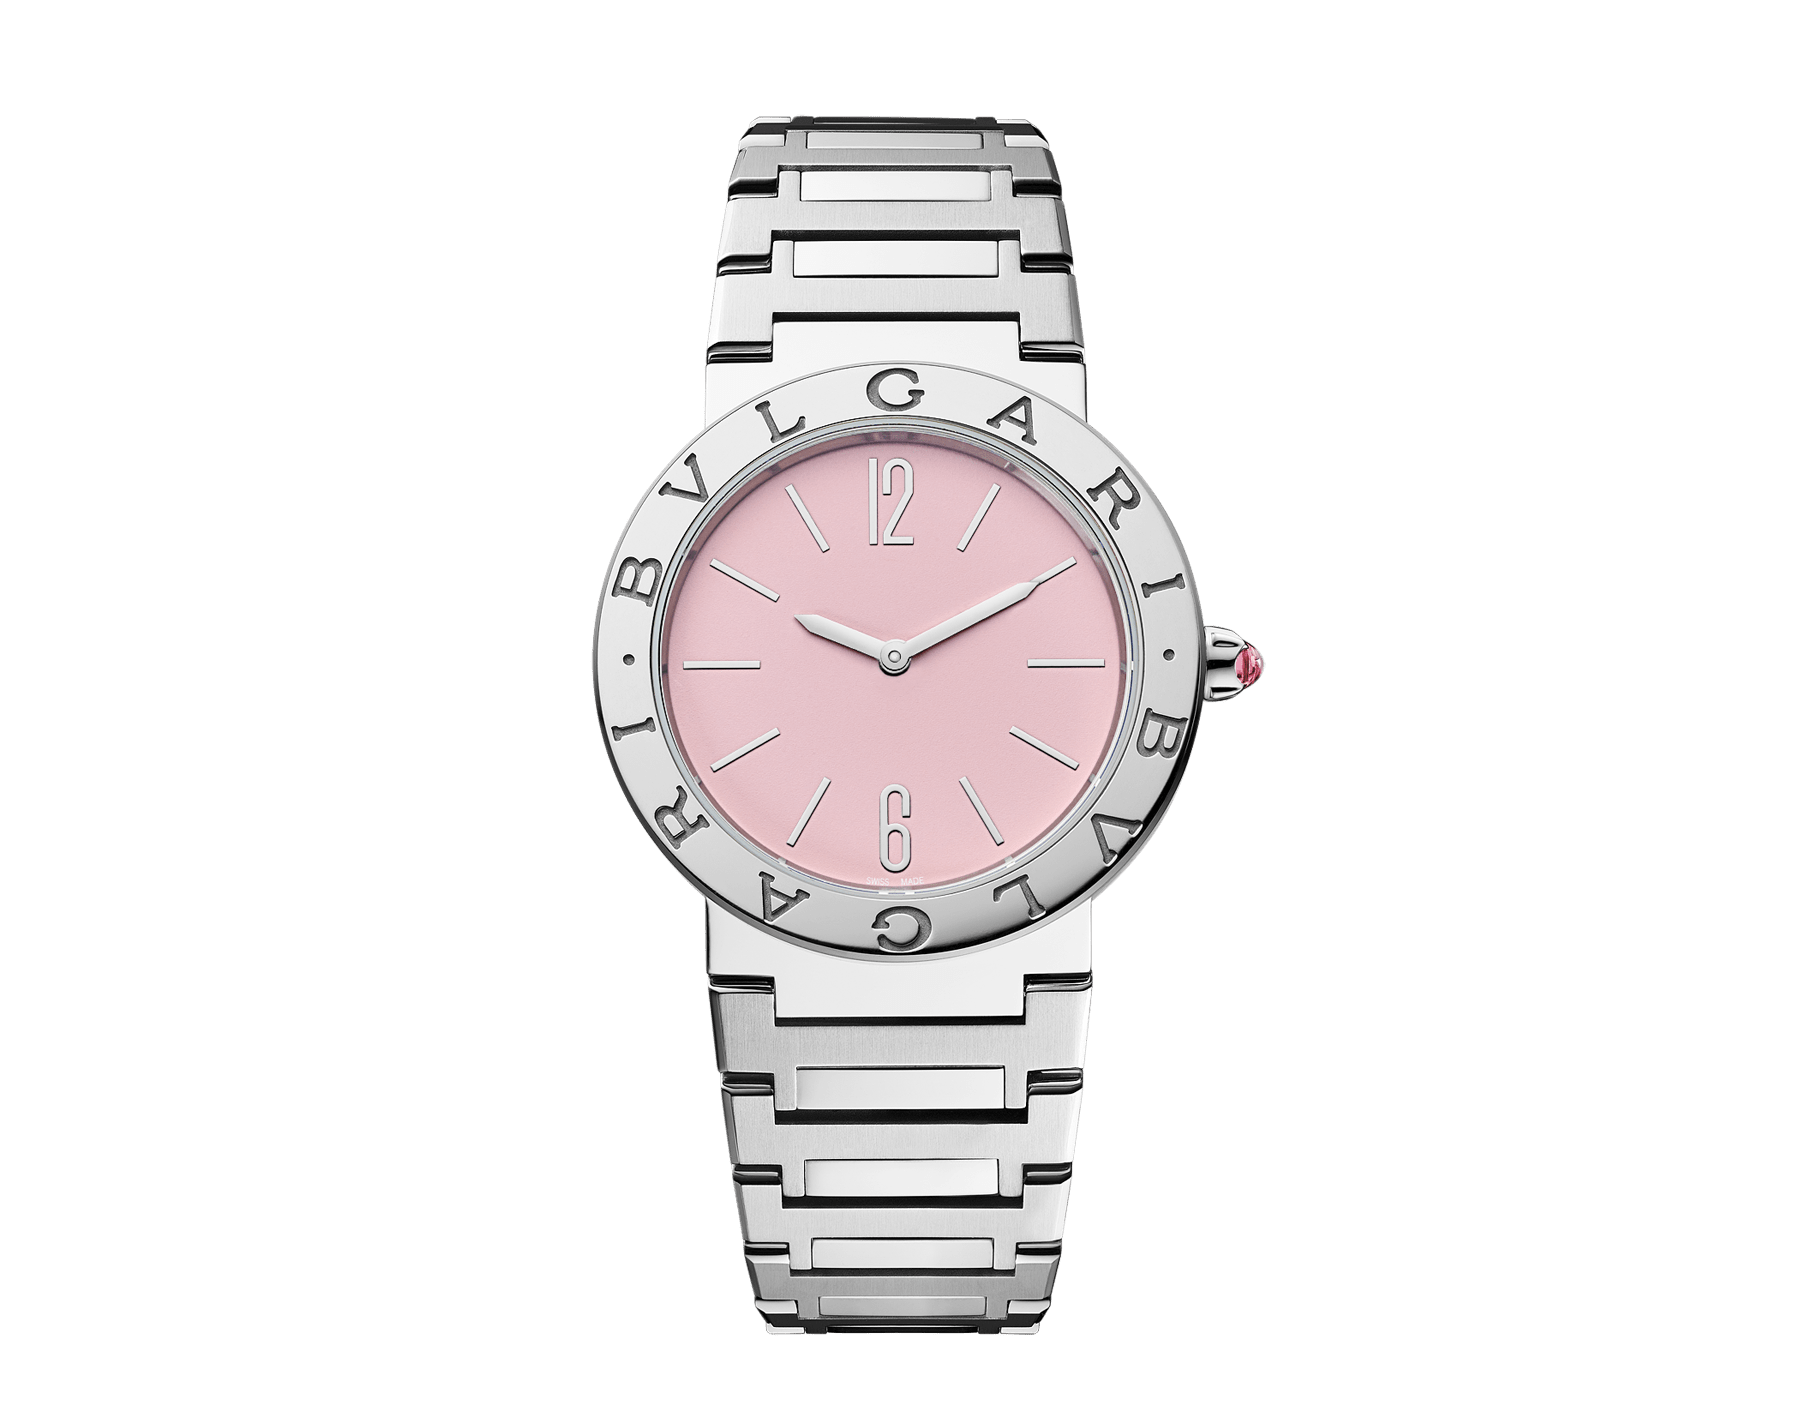 BULGARI BULGARI watch with stainless steel case and bezel engraved with double logo, polished and satin-brushed stainless steel bracelet and pink lacquered dial. Water-resistant up to 30 meters. Limited edition of 350 pieces. 103711 image 1